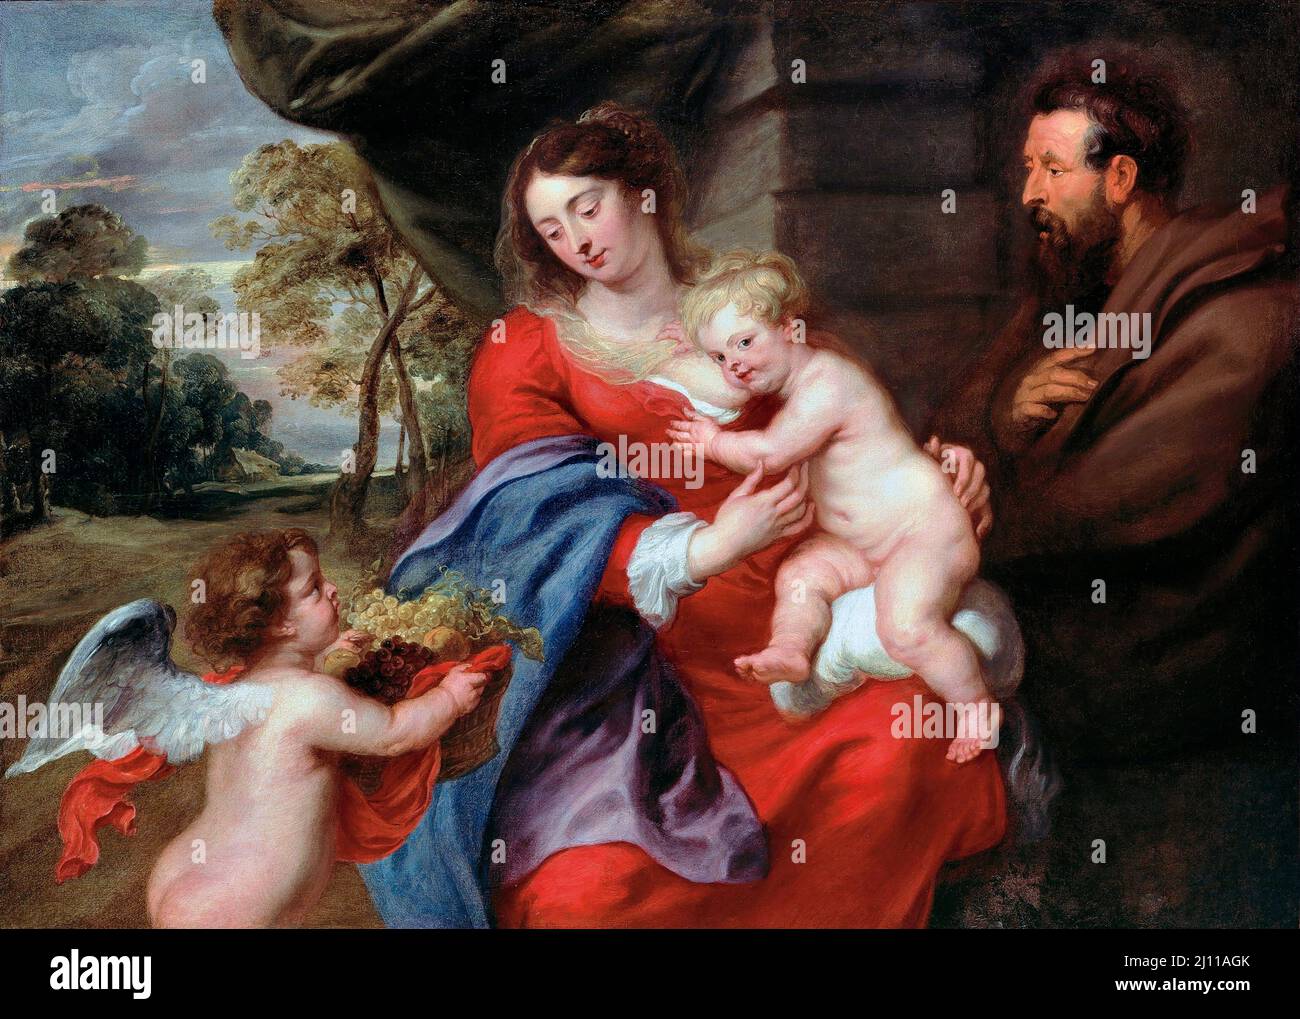 Rubens. Painting of The Holy Family by Peter Paul Rubens (1577-1640), oil on canvas, c. 1630 Stock Photo